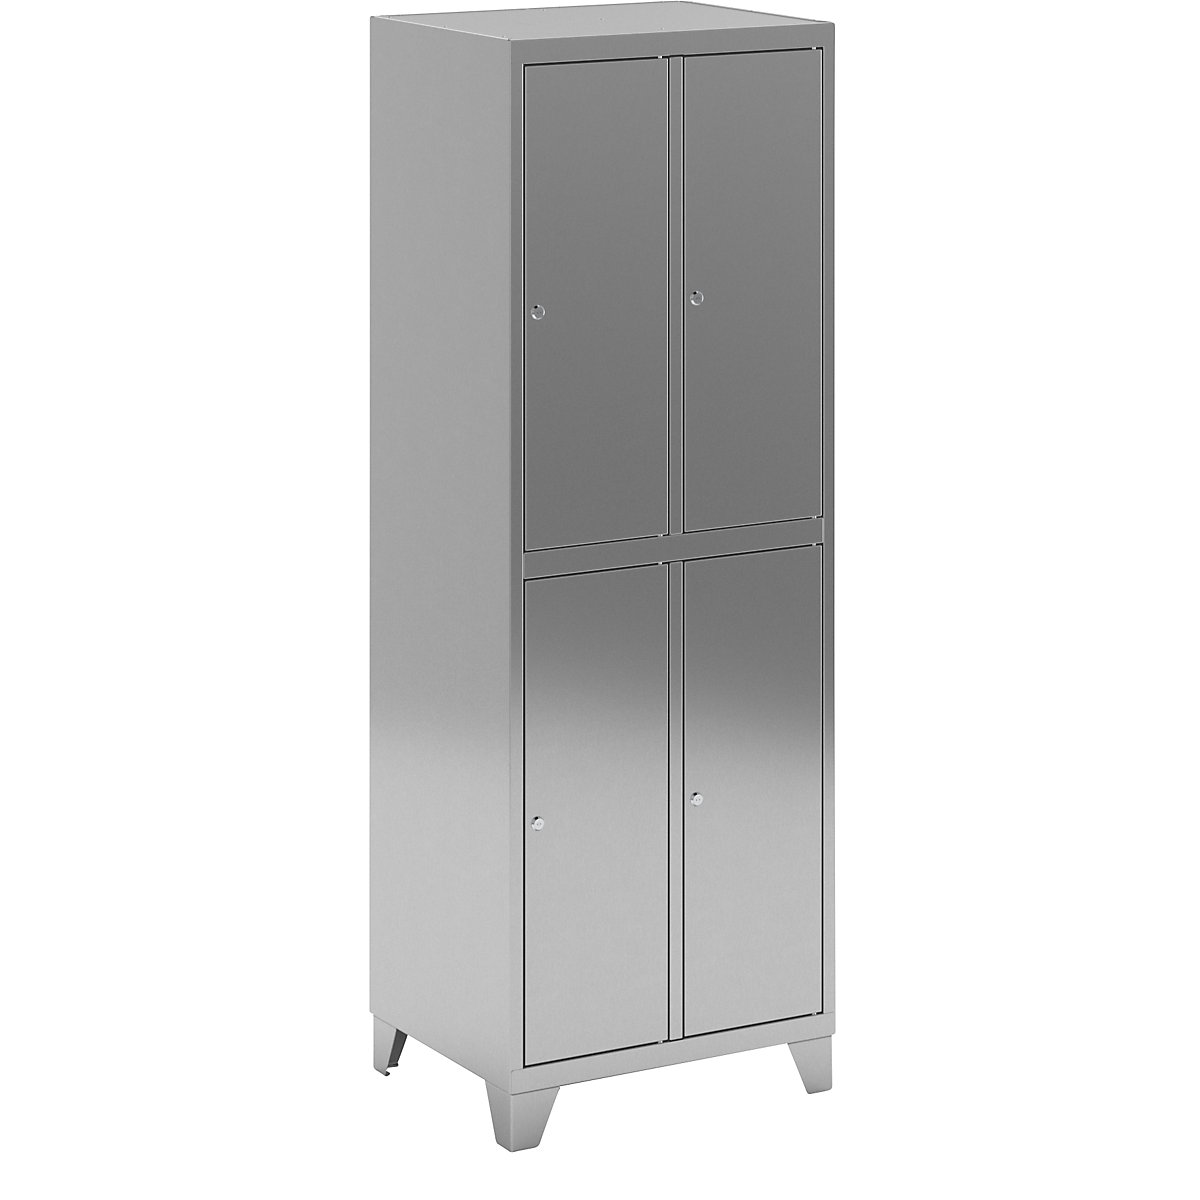 Stainless steel cupboard with stud feet